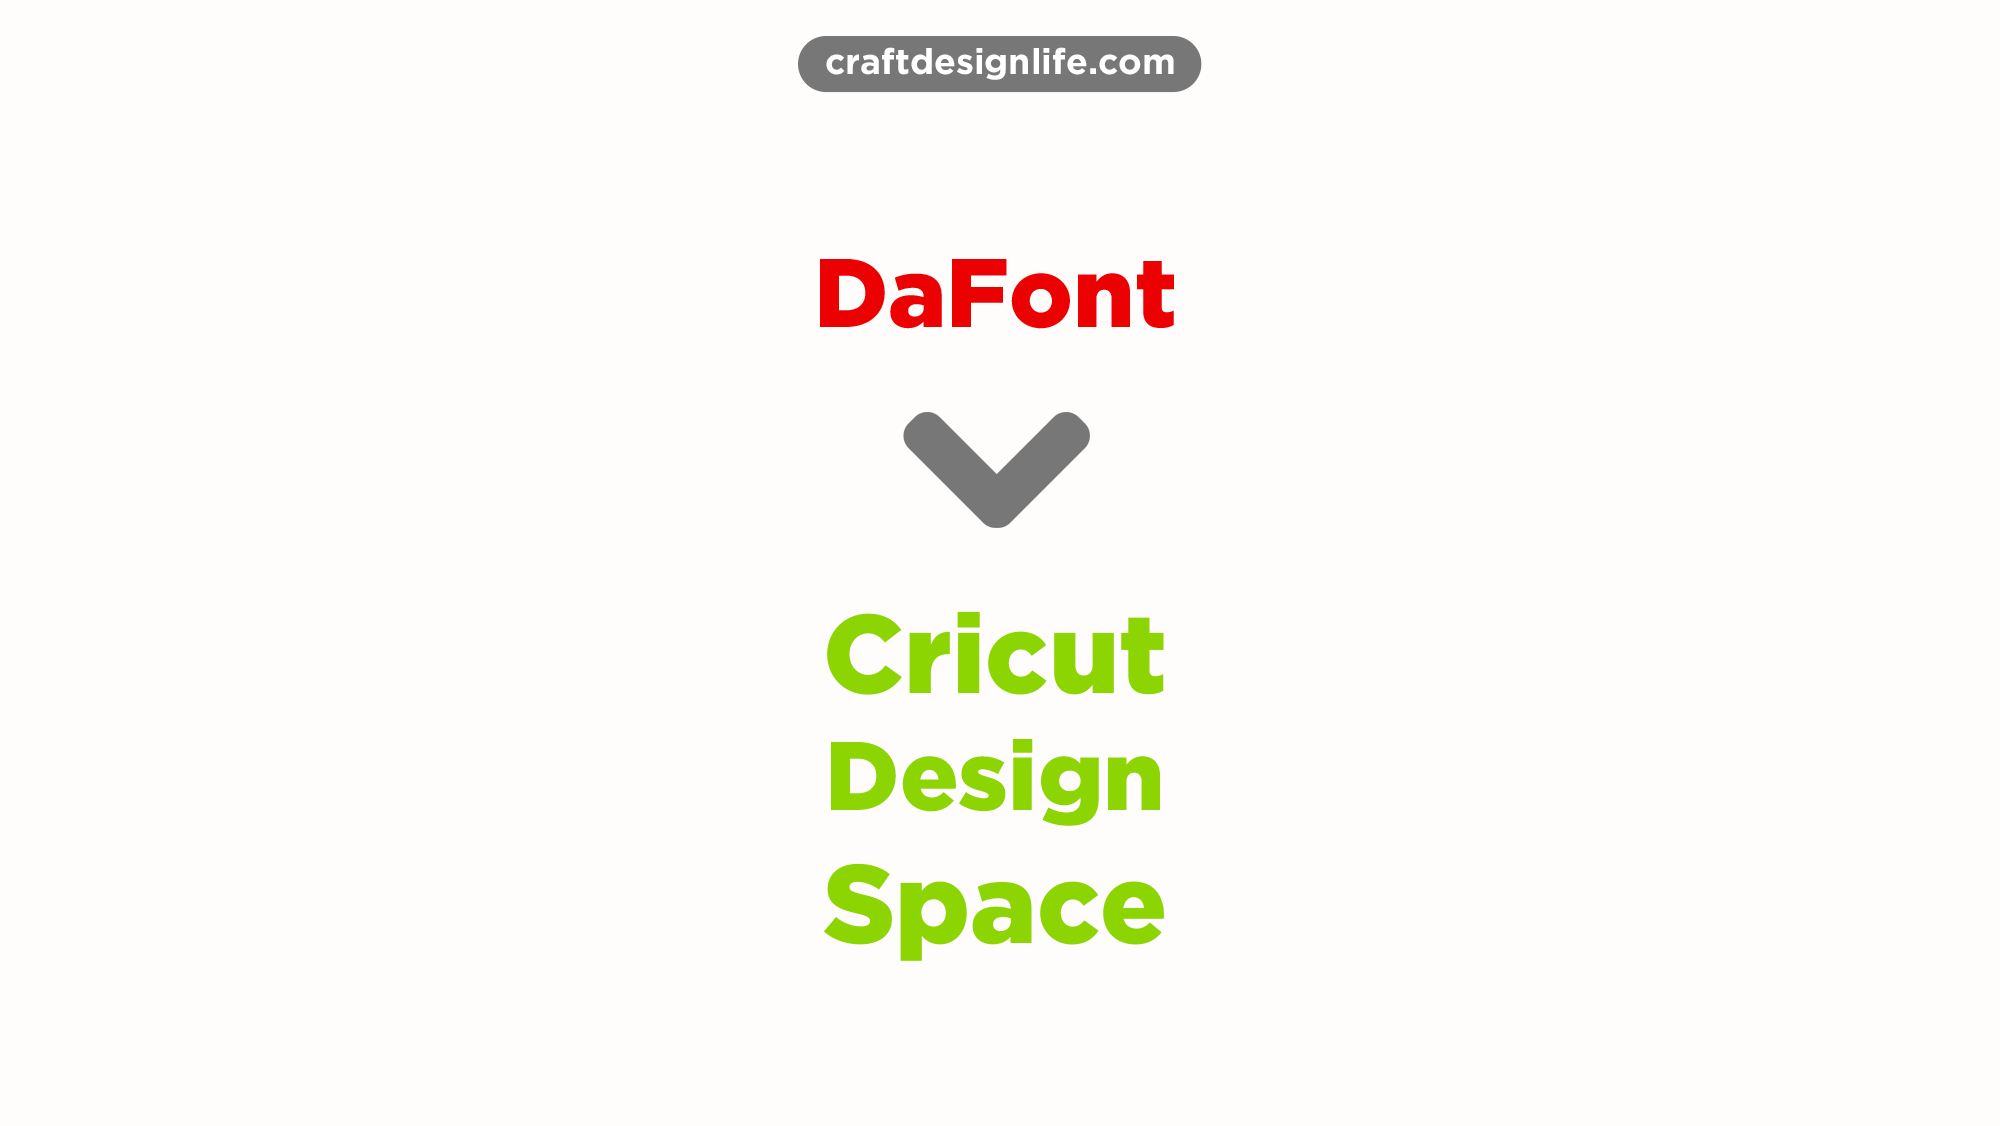 How to Add Fonts from DaFont to Cricut Design Space